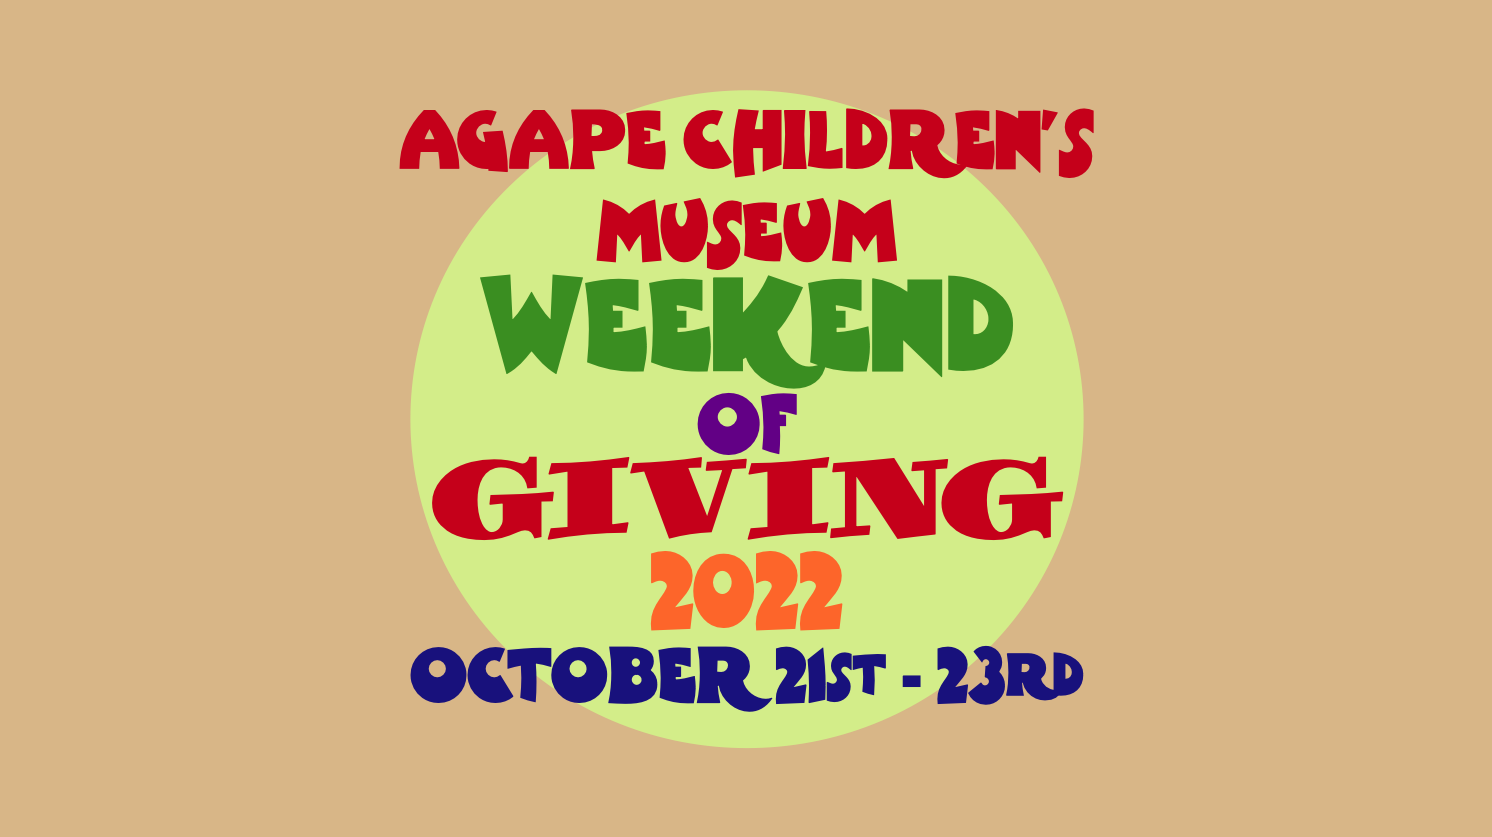 WEEKEND OF GIVING 2022 – OCTOBER 21st-23rd